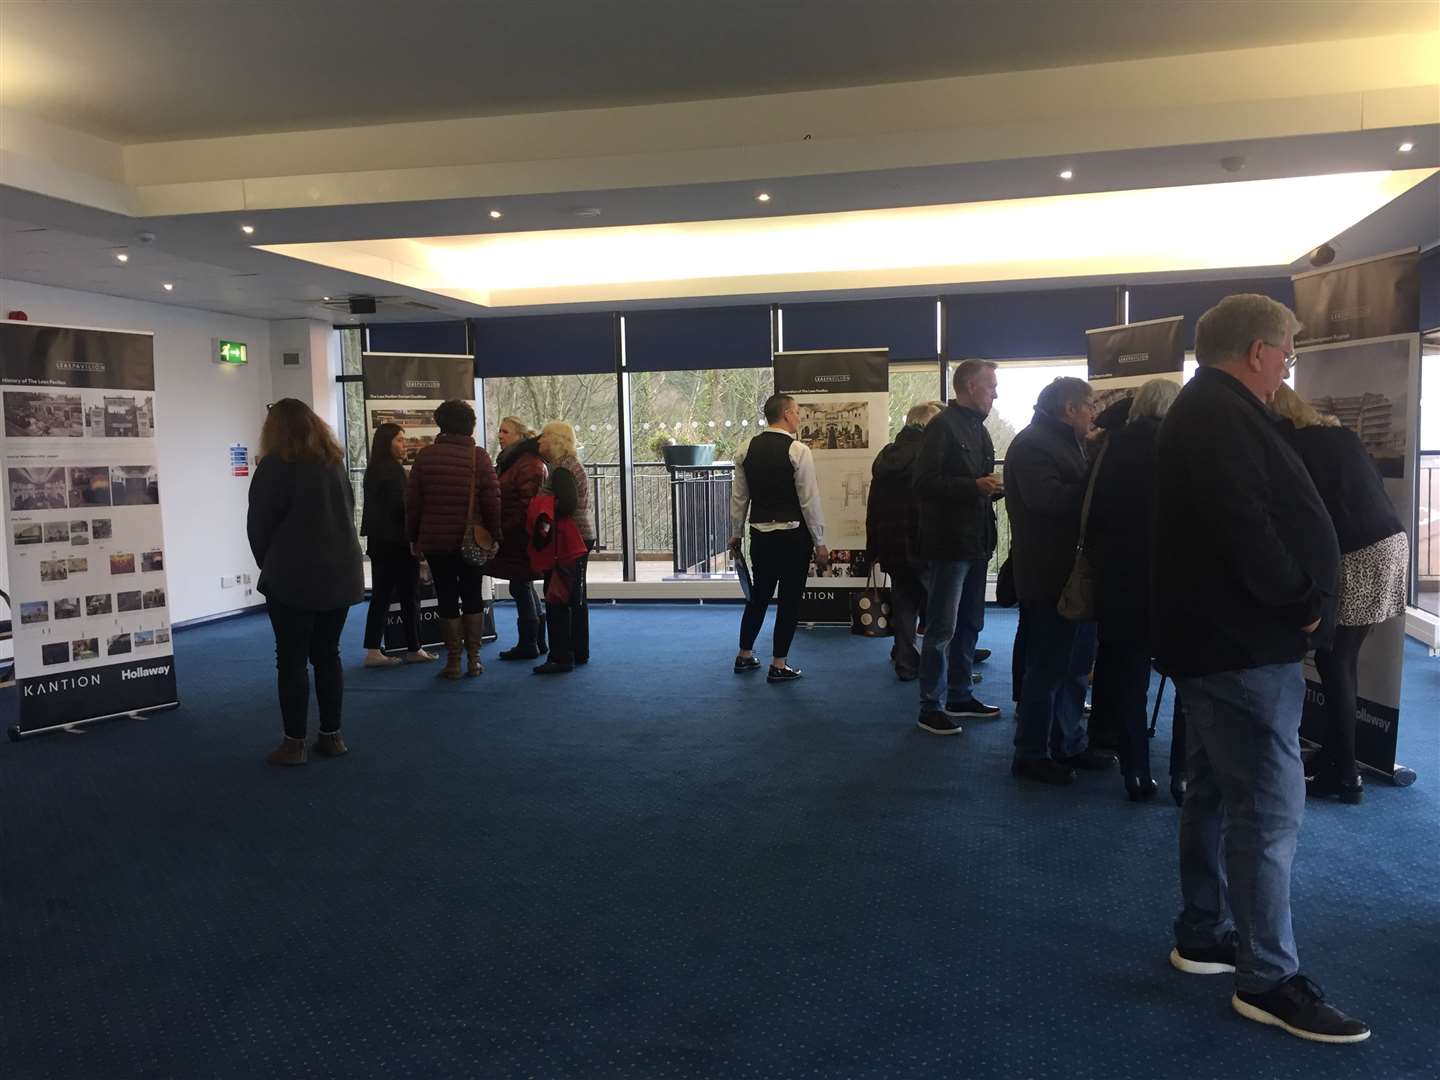 More than 130 people attended the public consultation